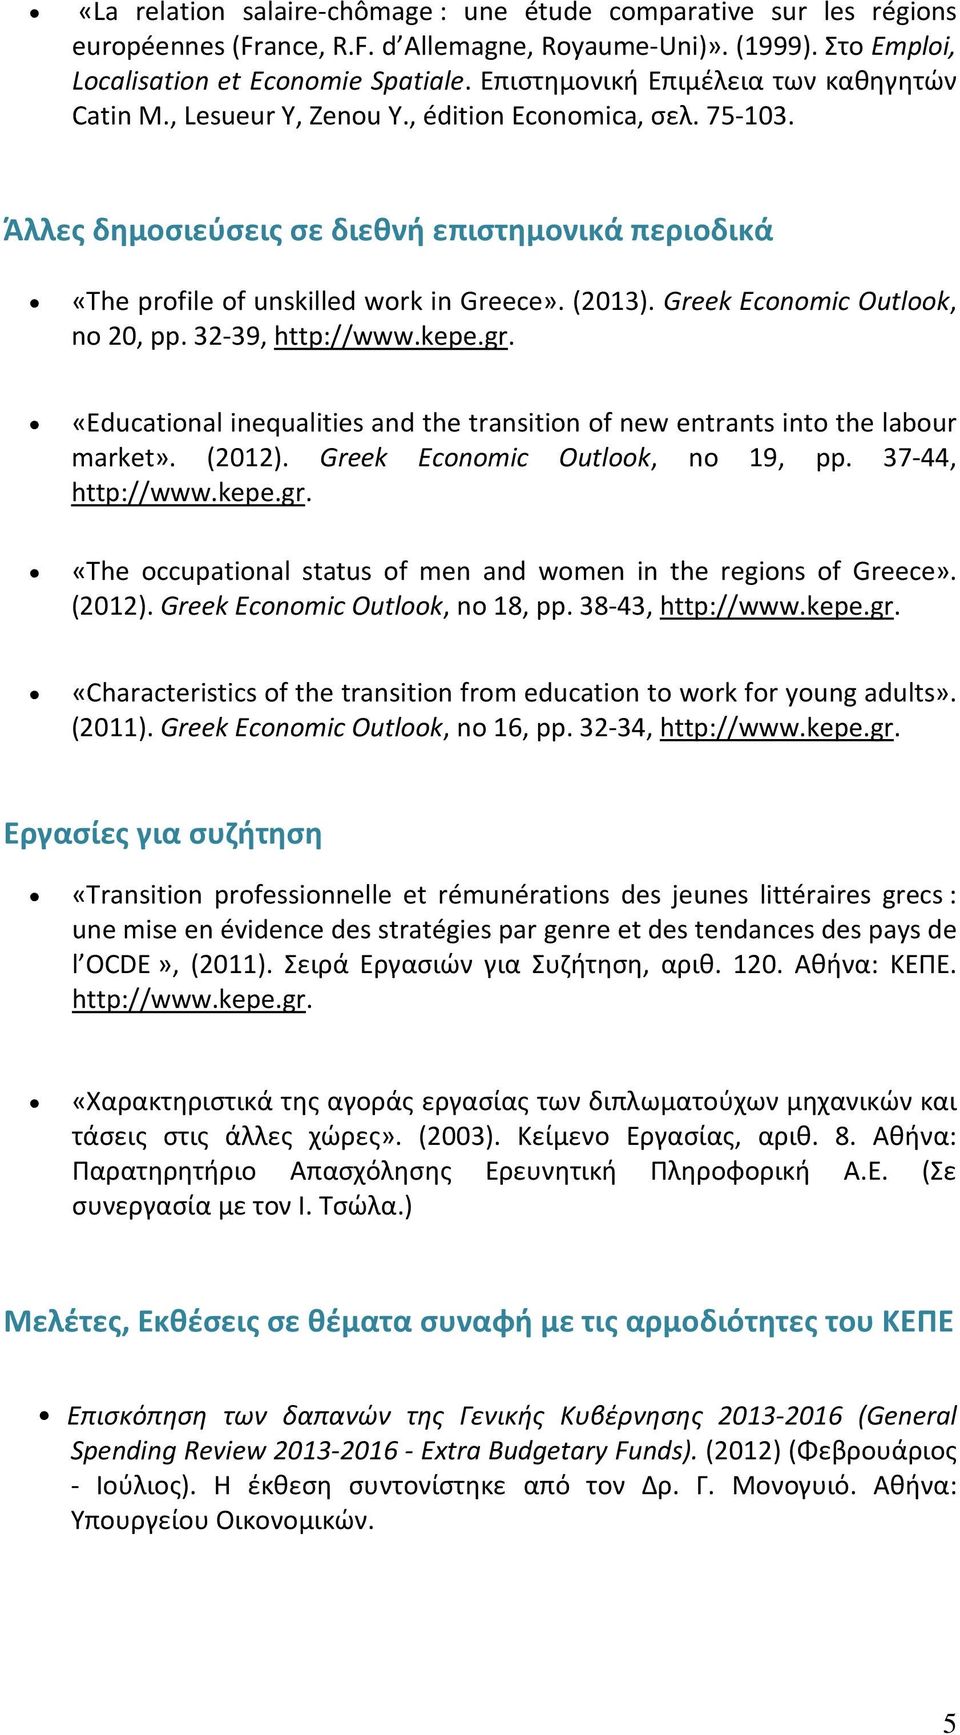 (2013). Greek Economic Outlook, no 20, pp. 32-39, http://www.kepe.gr. «Educational inequalities and the transition of new entrants into the labour market». (2012). Greek Economic Outlook, no 19, pp.